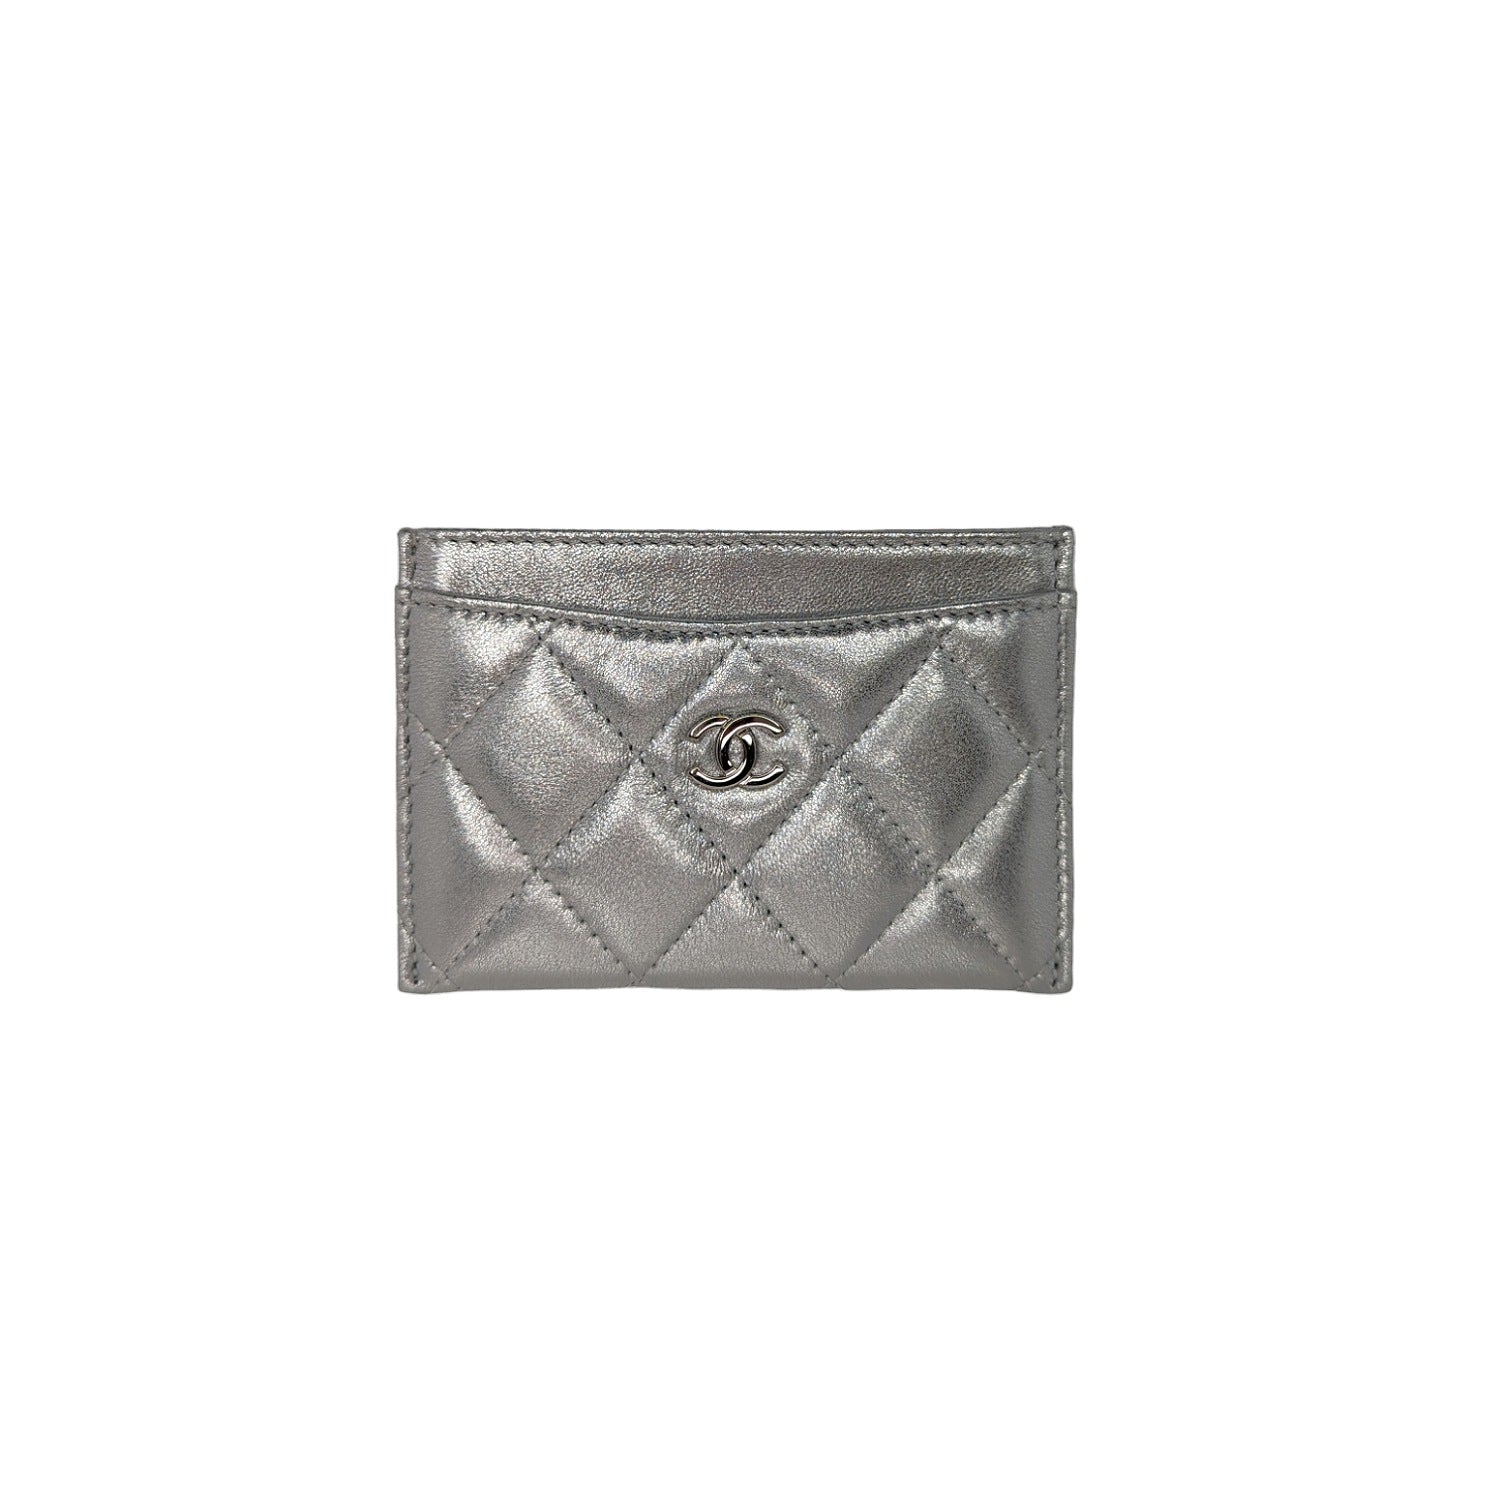 Chanel Black Quilted Leather Boy Zip around Continental Wallet Chanel